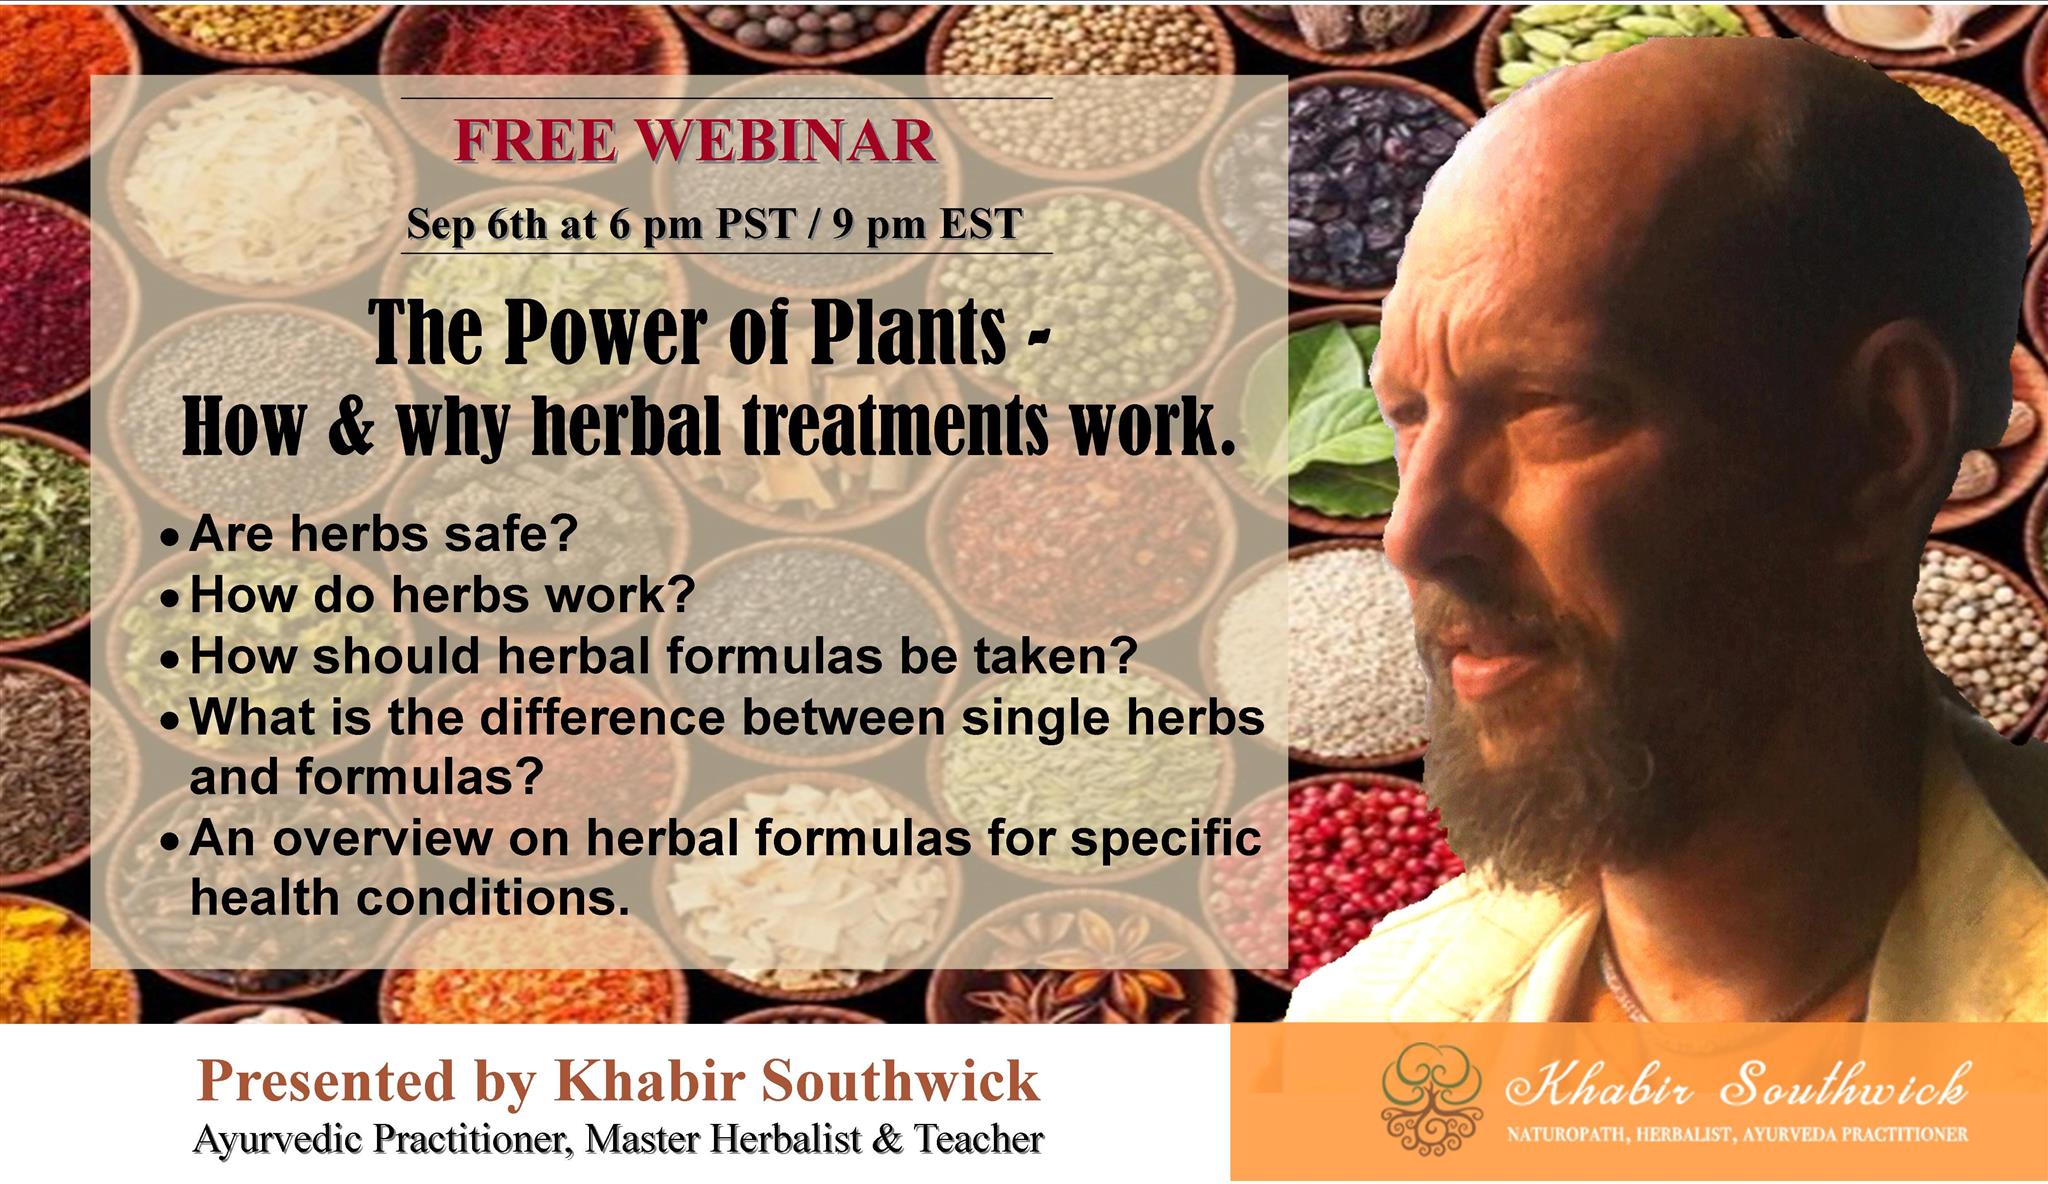 The power of plants How & why herbal treatments work.